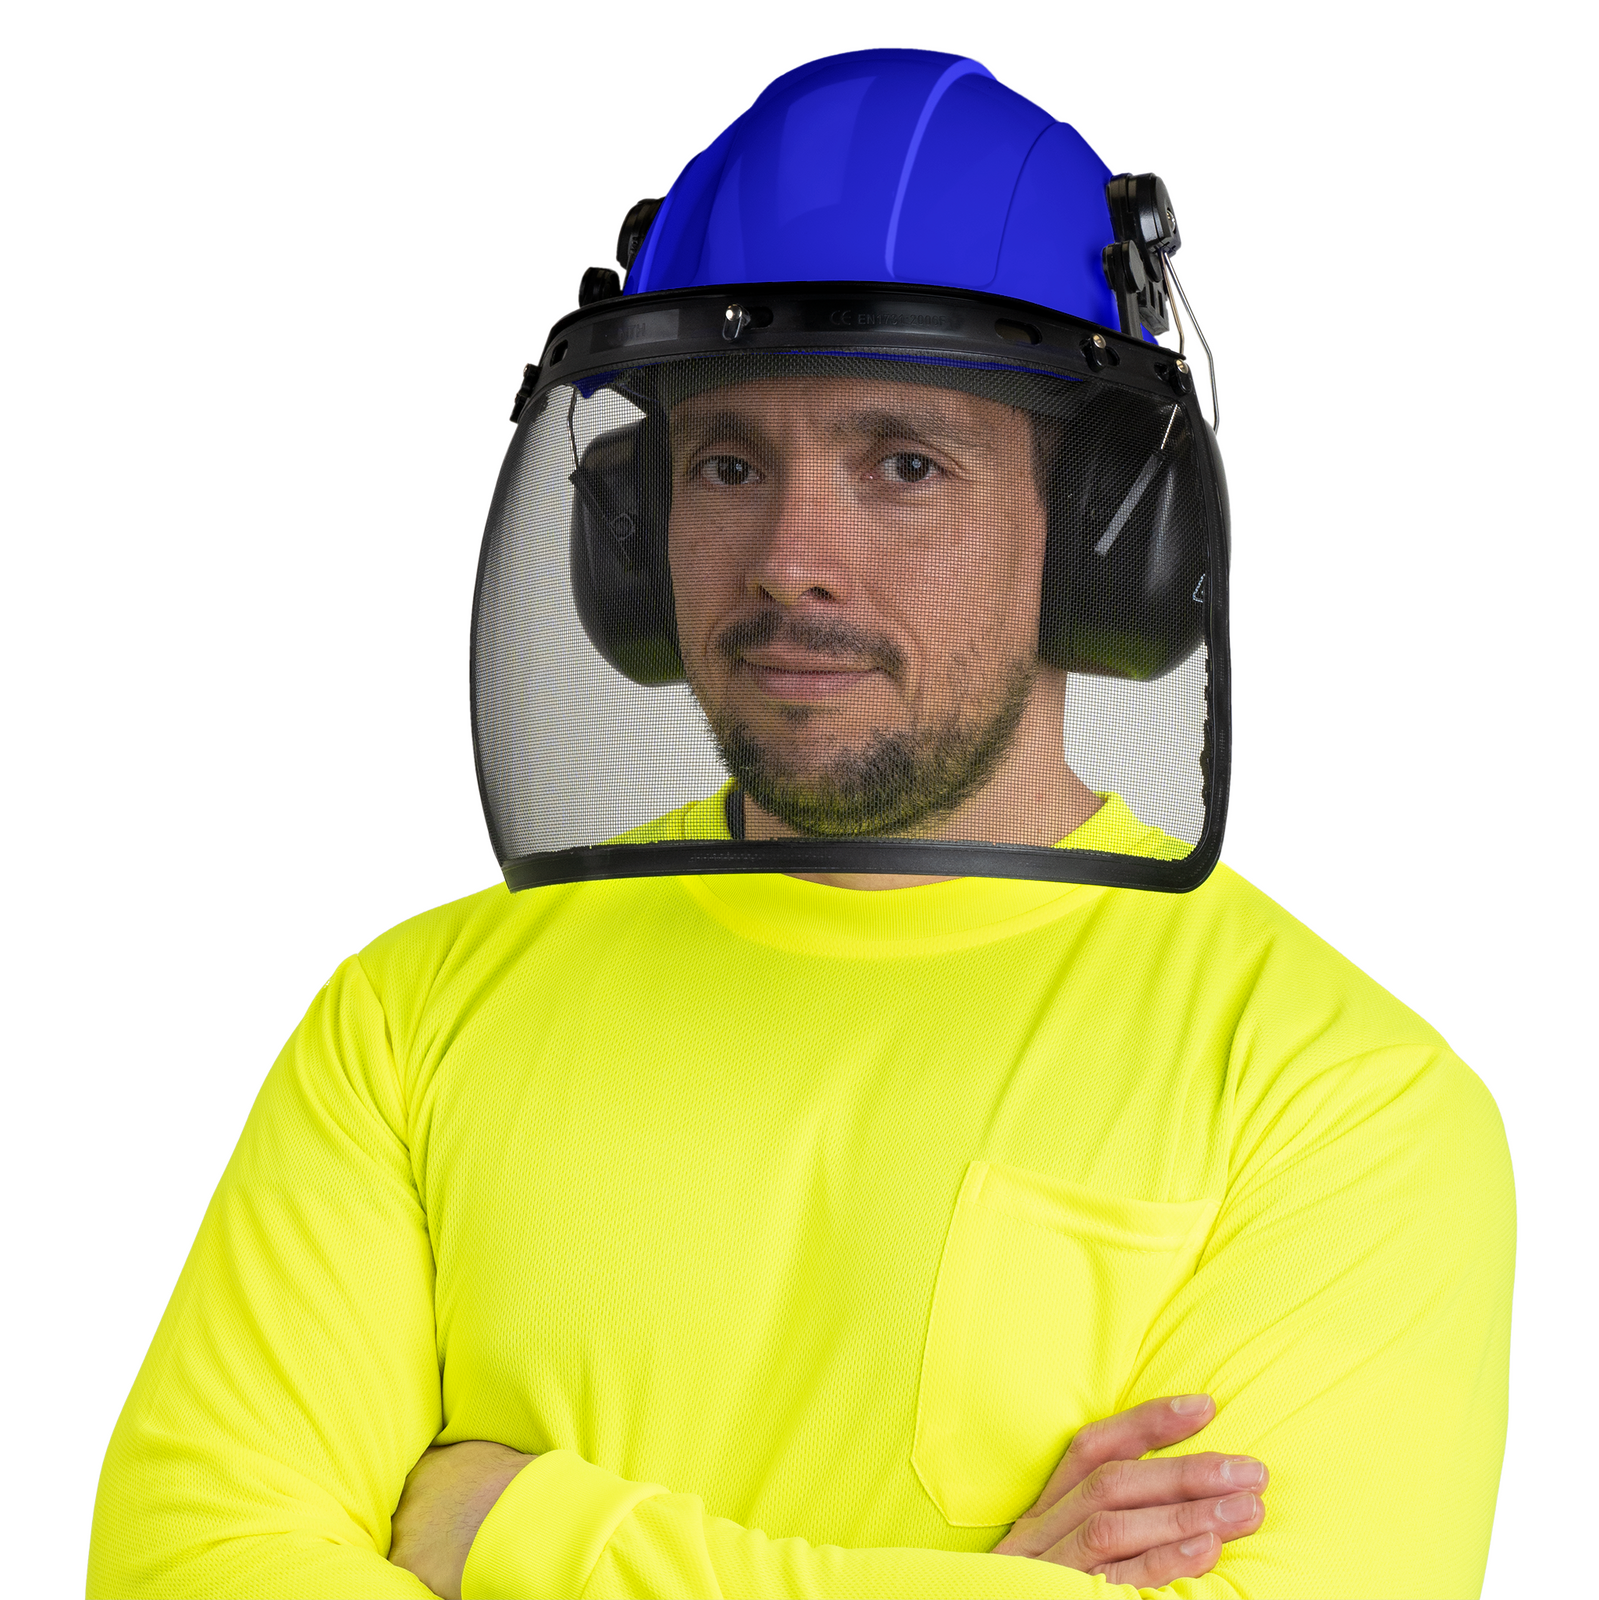 Man wearing a blue cap style hard hat safety kit with mounted earmuffs and iron mesh face shield